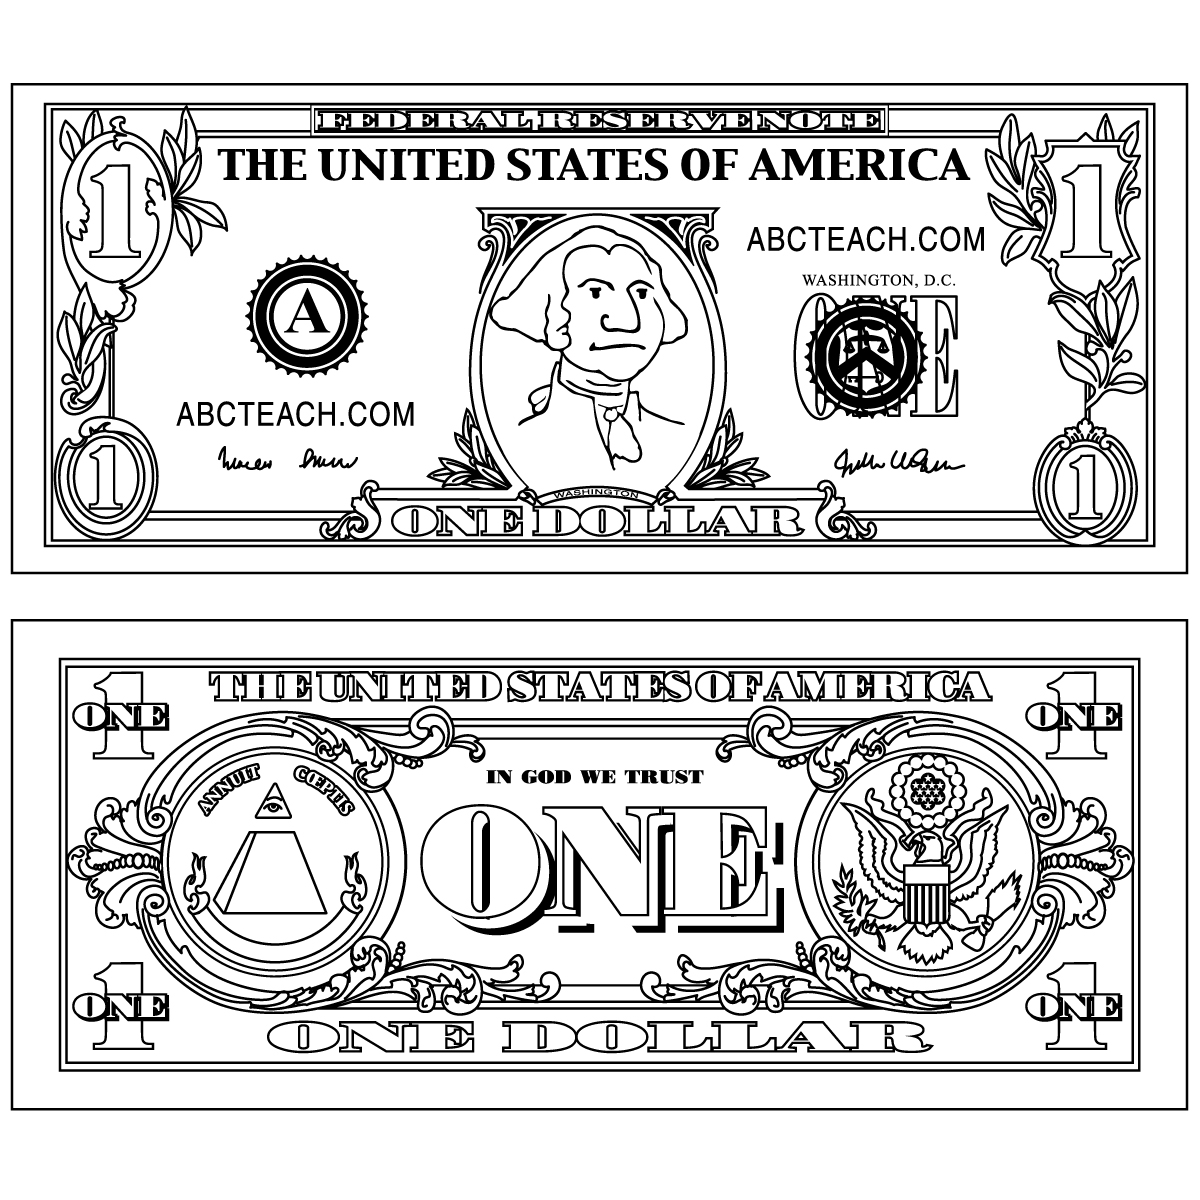 black and white dollar bill template